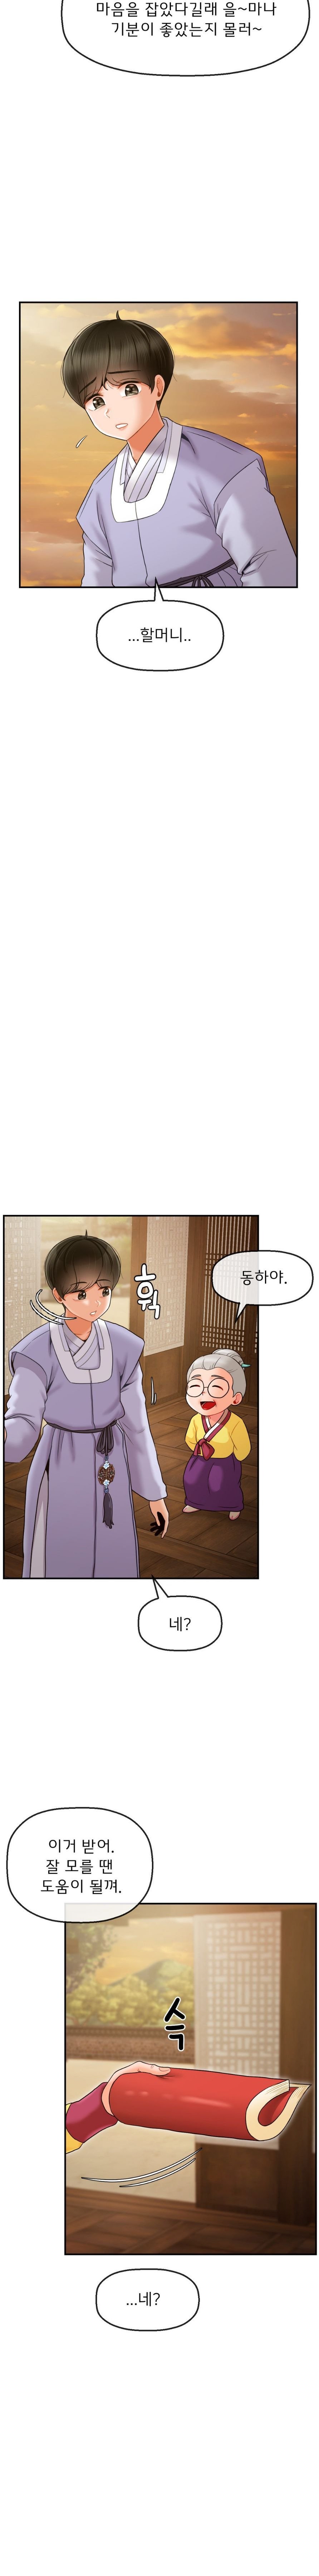 seventeenth-only-son-raw-chap-3-10